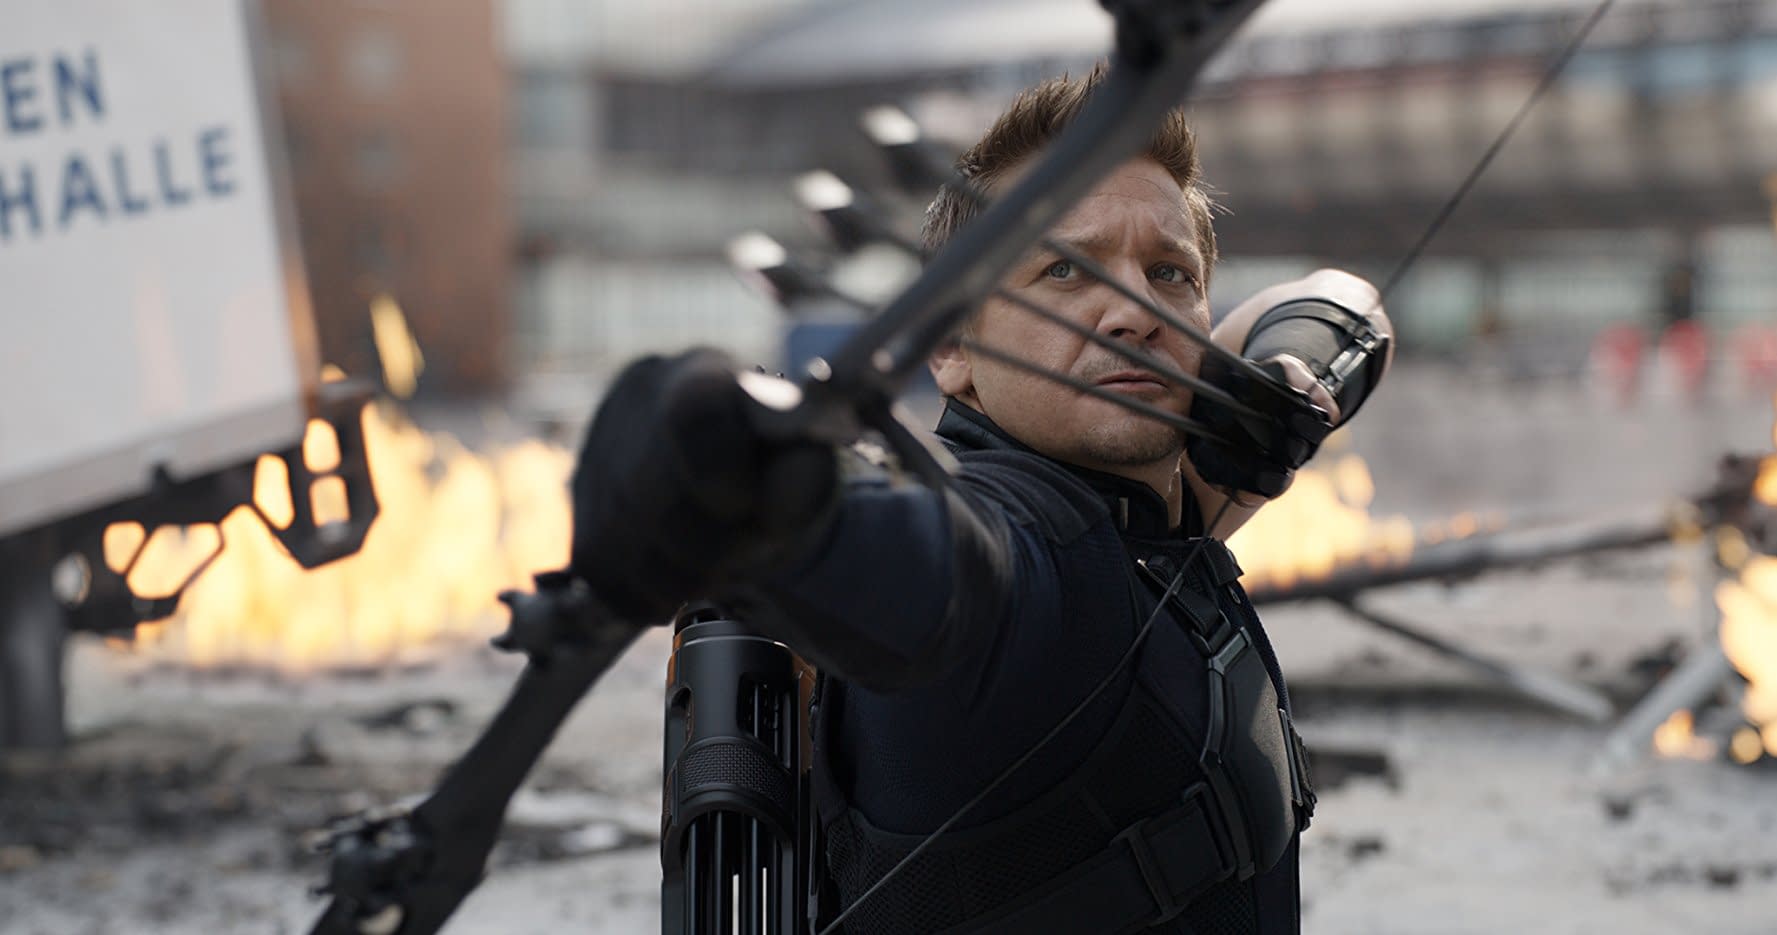 Jeremy Renner Confirms the Russo Brothers Got Death Threats Over Avengers: Infinity War